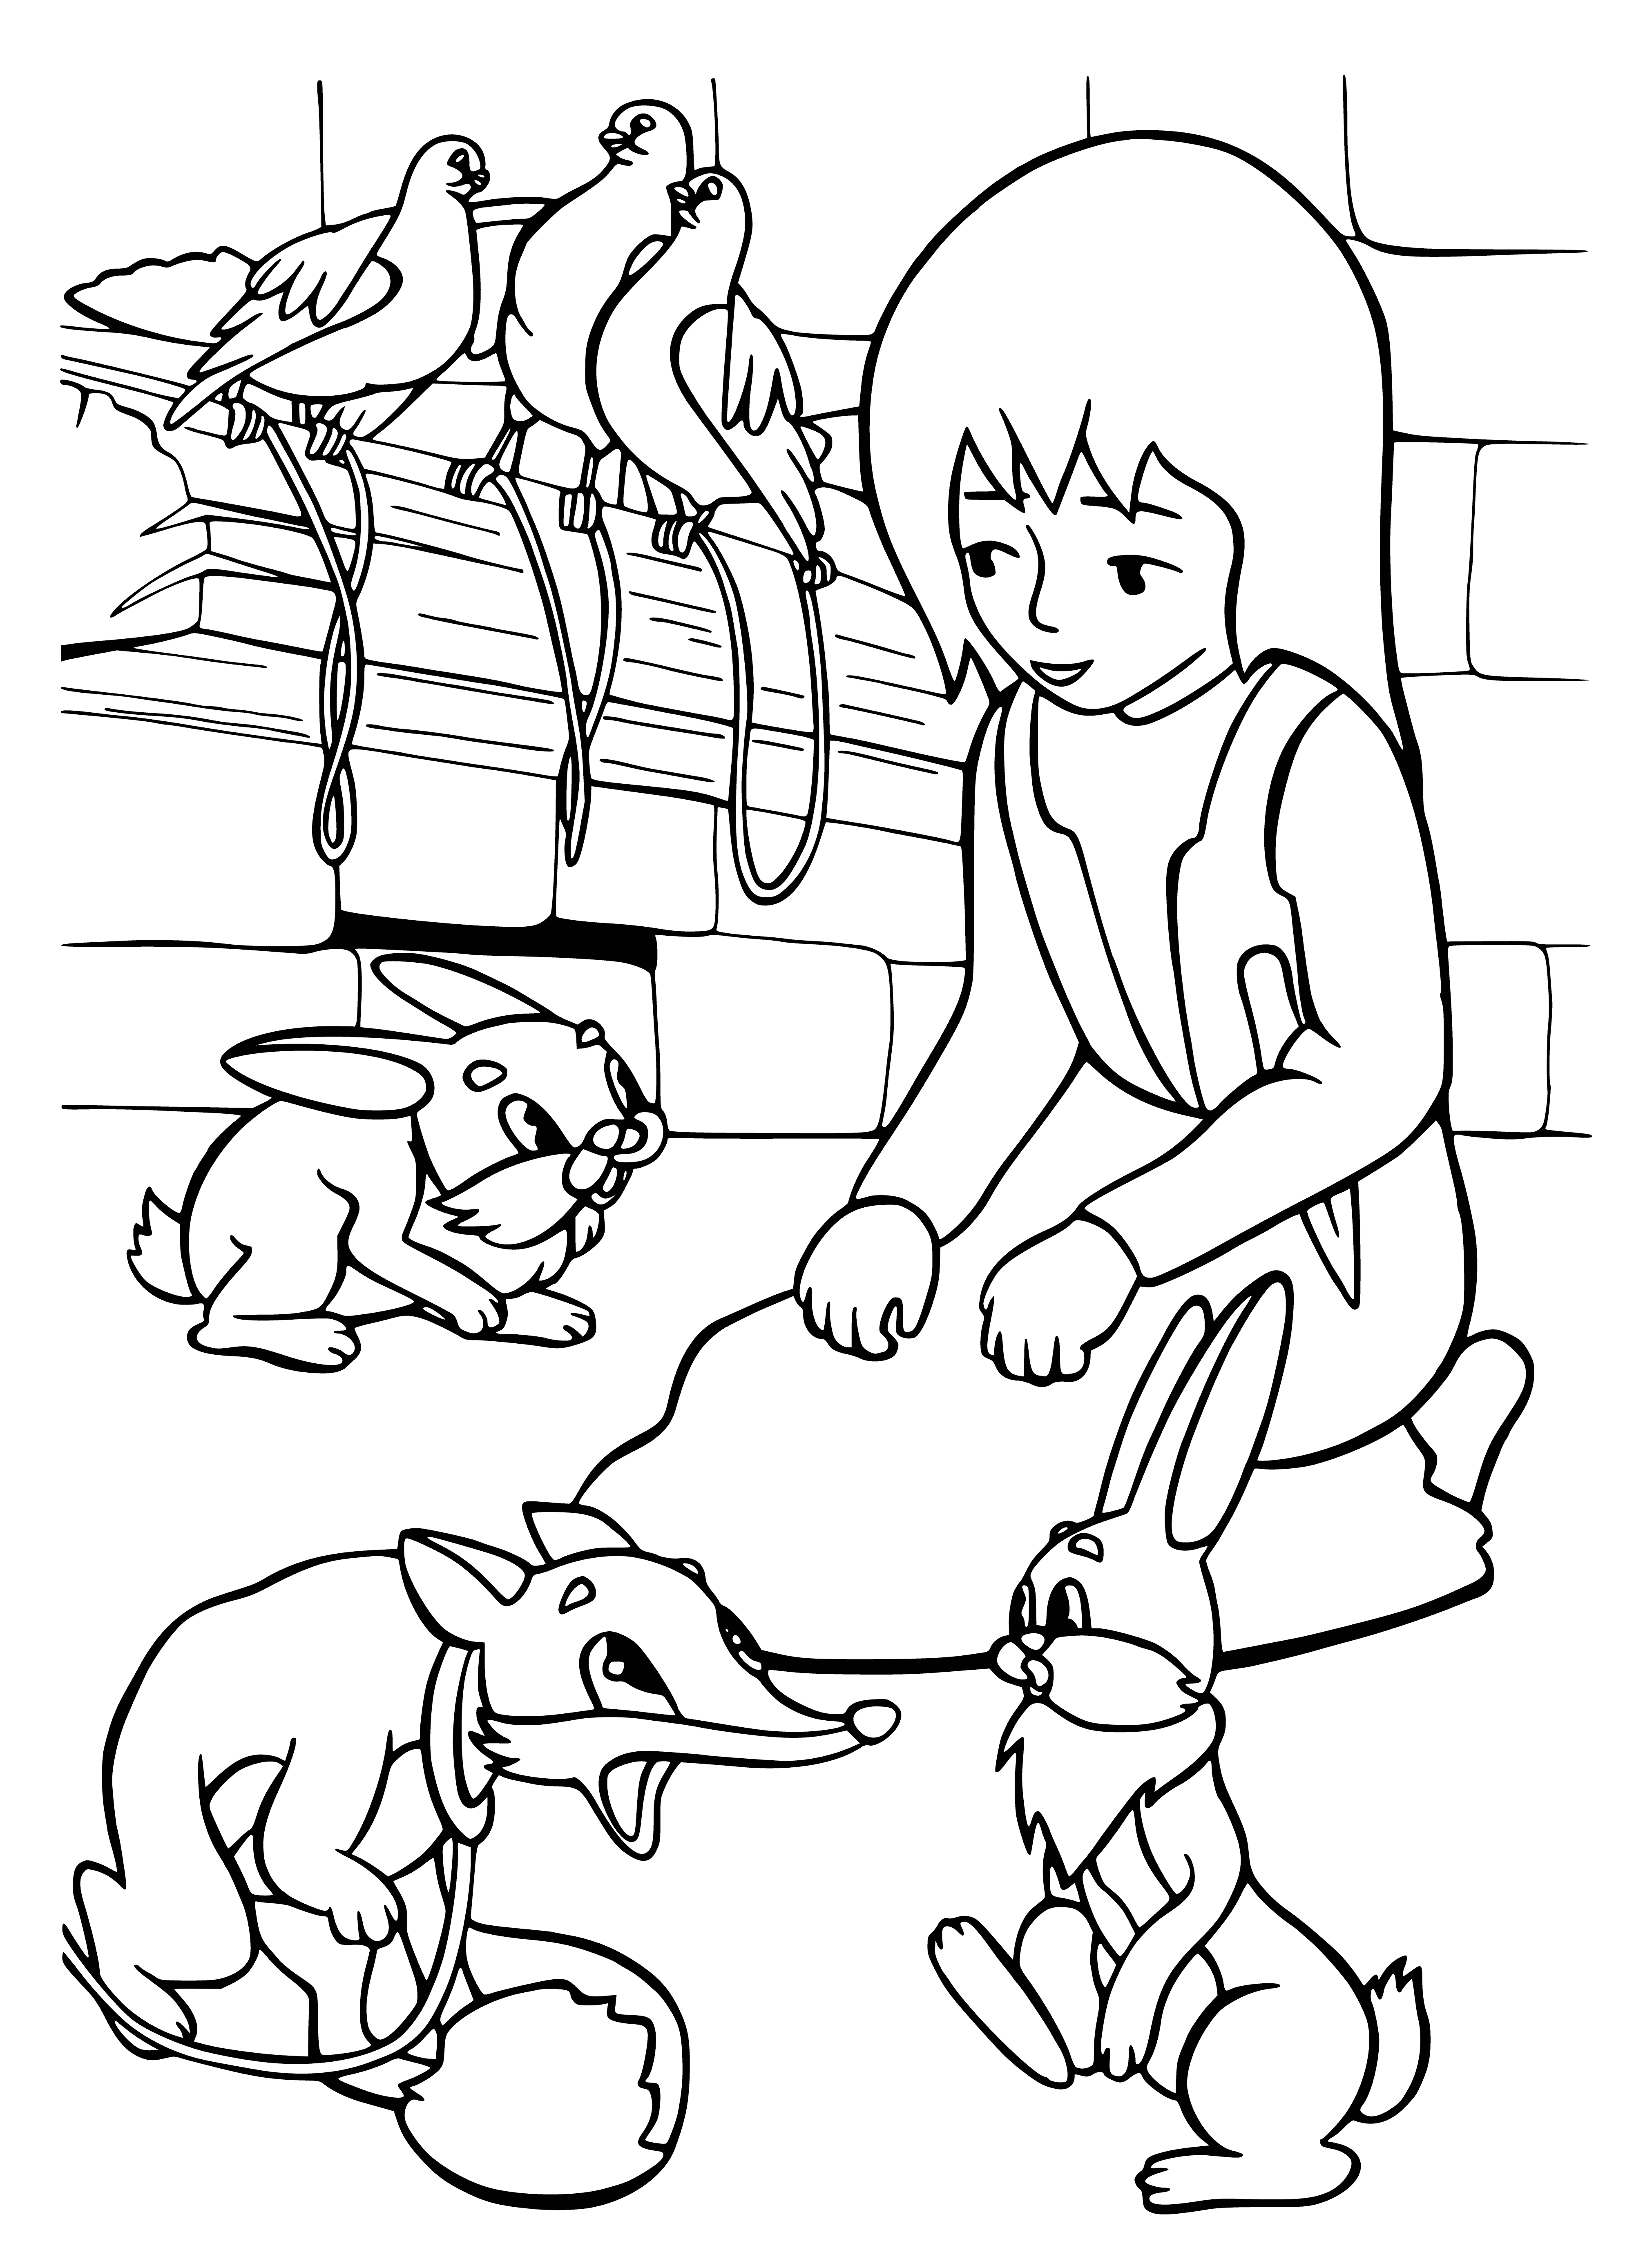 coloring page: Girl stands in front of large door, amazed by glass case of delicate animal figurines. She looks excited, ready for what's inside.